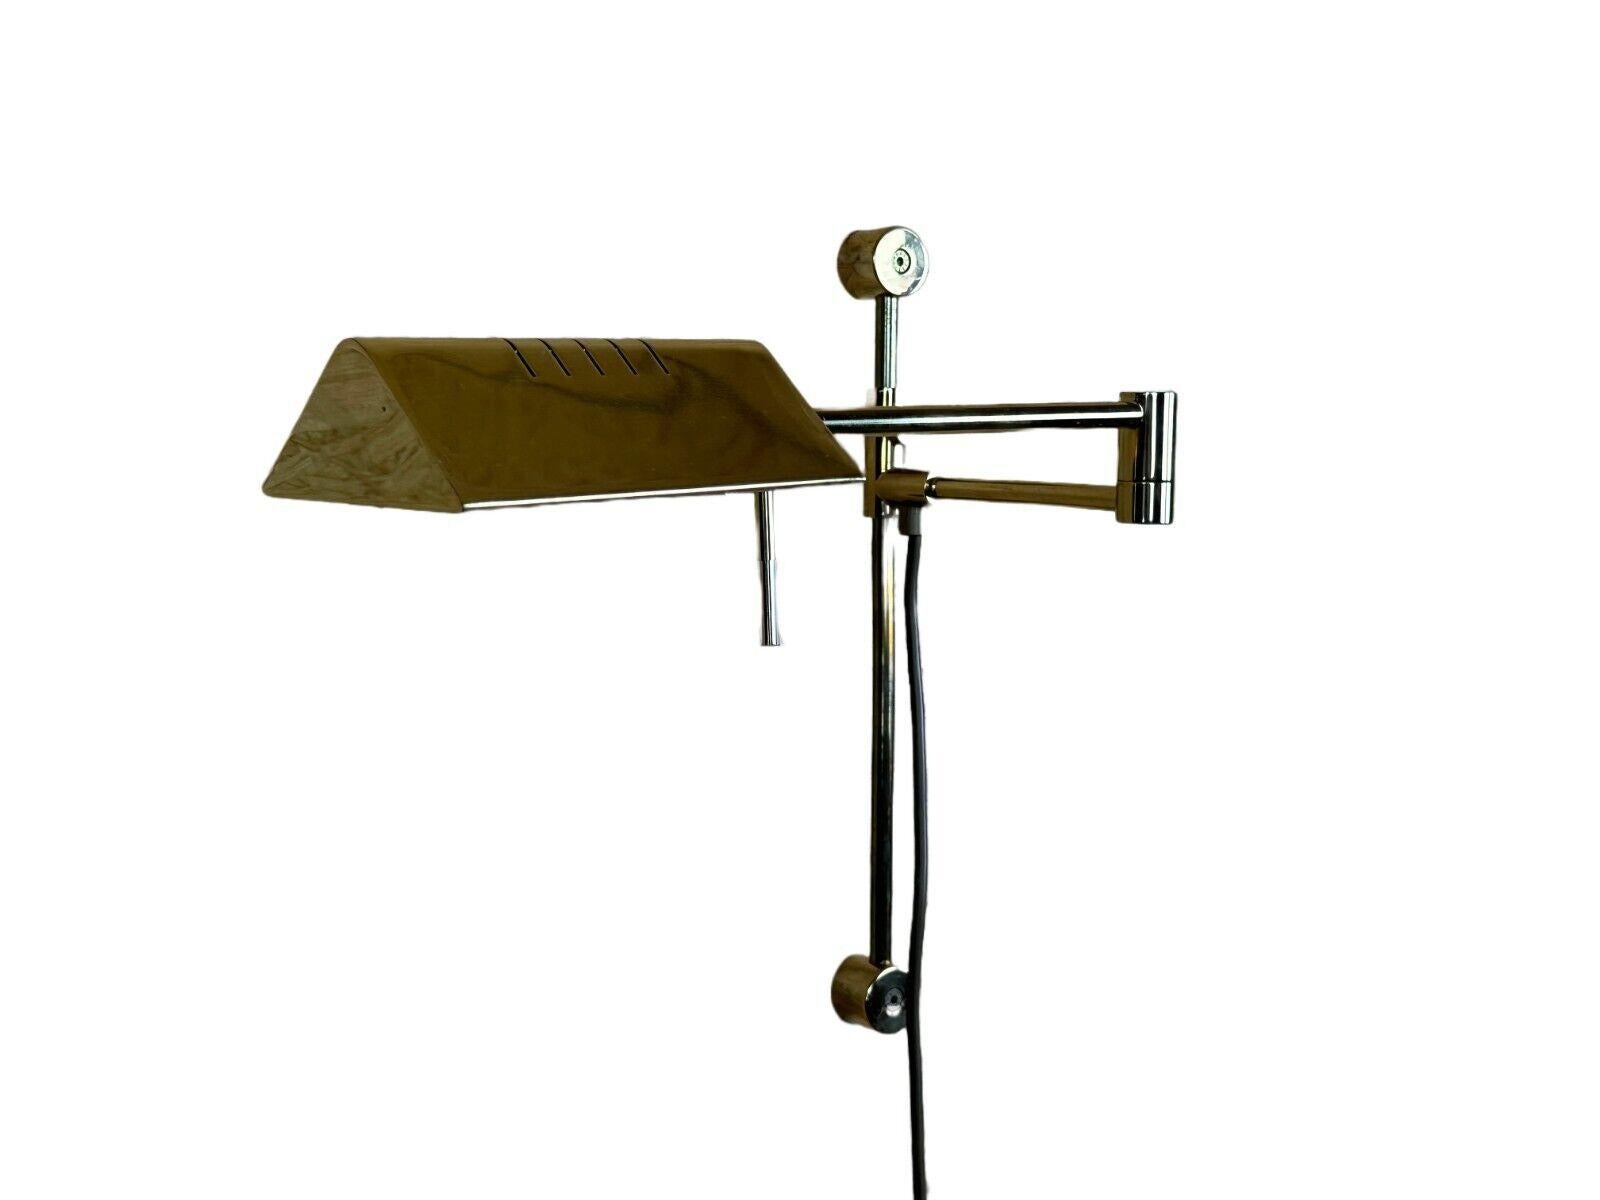 60s 70s wall lamp articulated lamp brass Relco Made in Italy Design

Object: wall lamp

Manufacturer: Relco

Condition: good

Age: around 1970

Dimensions:

Width = 49cm
Depth = 10cm
Height = 34cm

Other notes:

The pictures serve as part of the